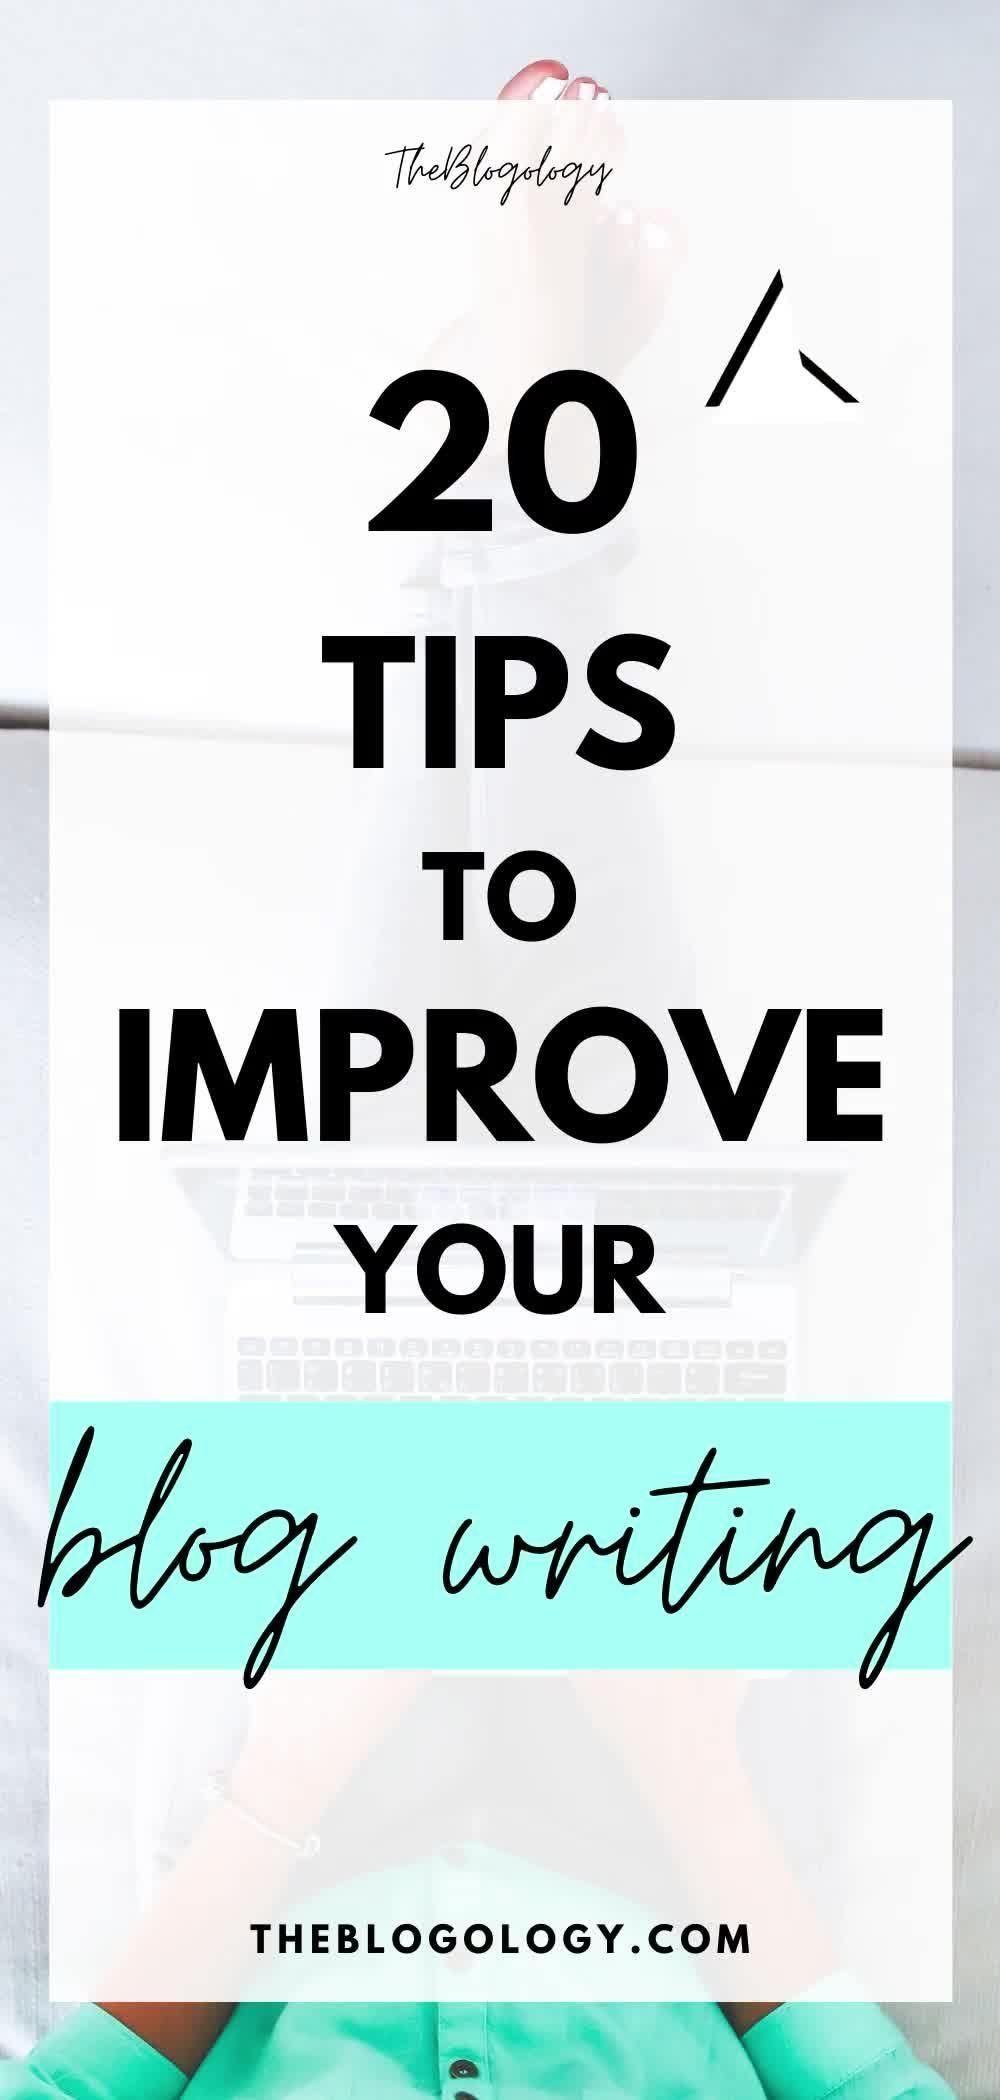 Advertising-Infographics-20-Tips-to-Improve-Your-Blog-Writing Advertising Infographics : 20 Tips to Improve Your Blog Writing | BLOGOLOGY